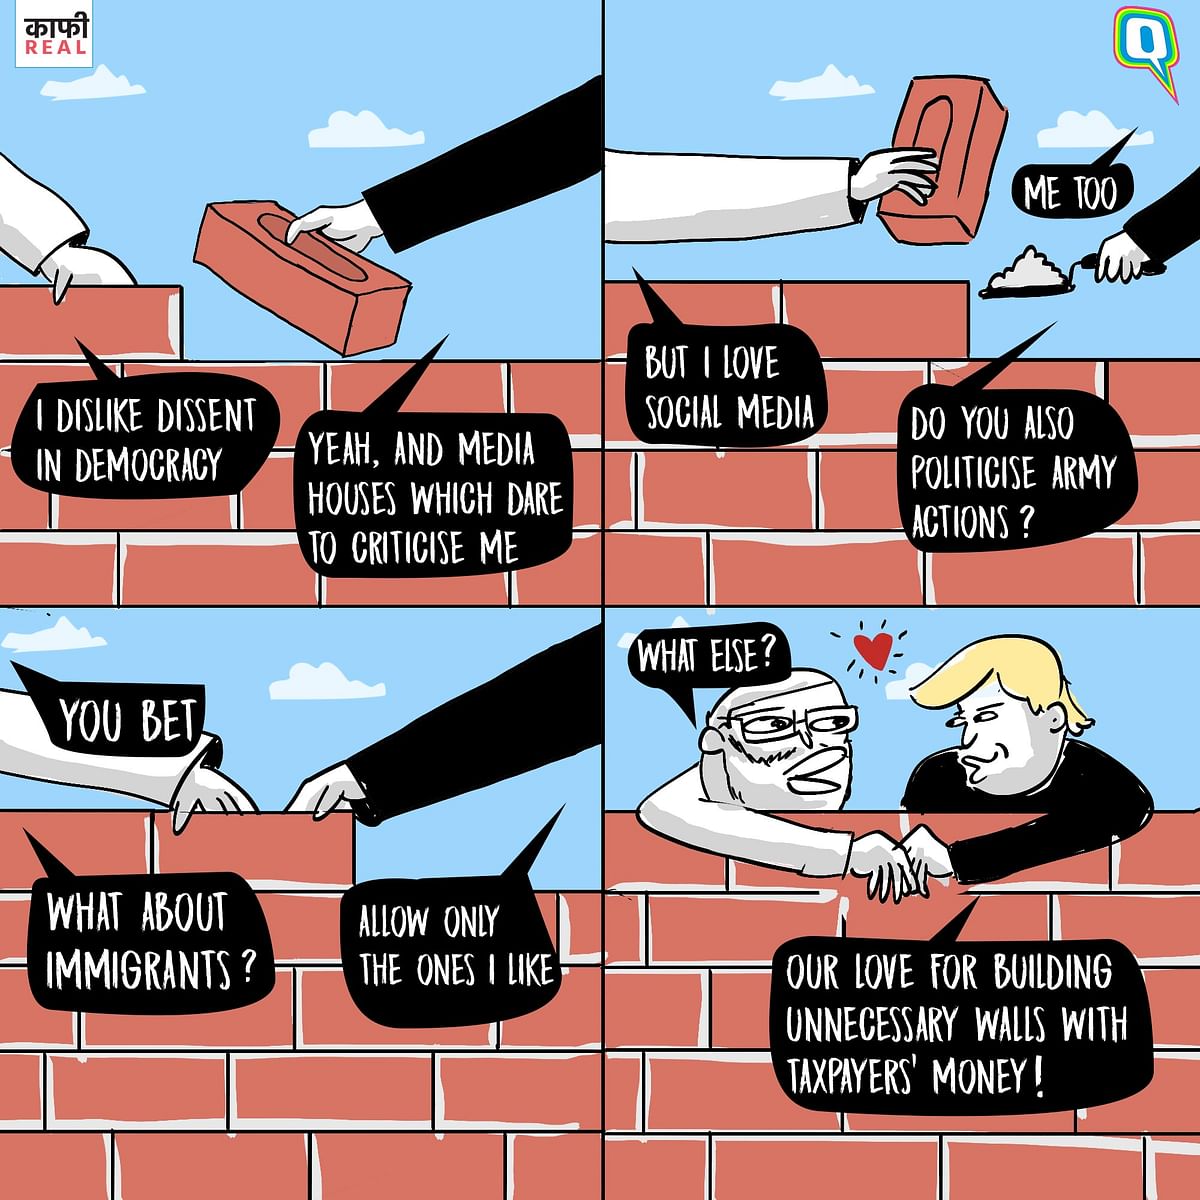 If they had a brick for every similarity between them, Trump and Modi could have built a “yuuuuge” wall together.